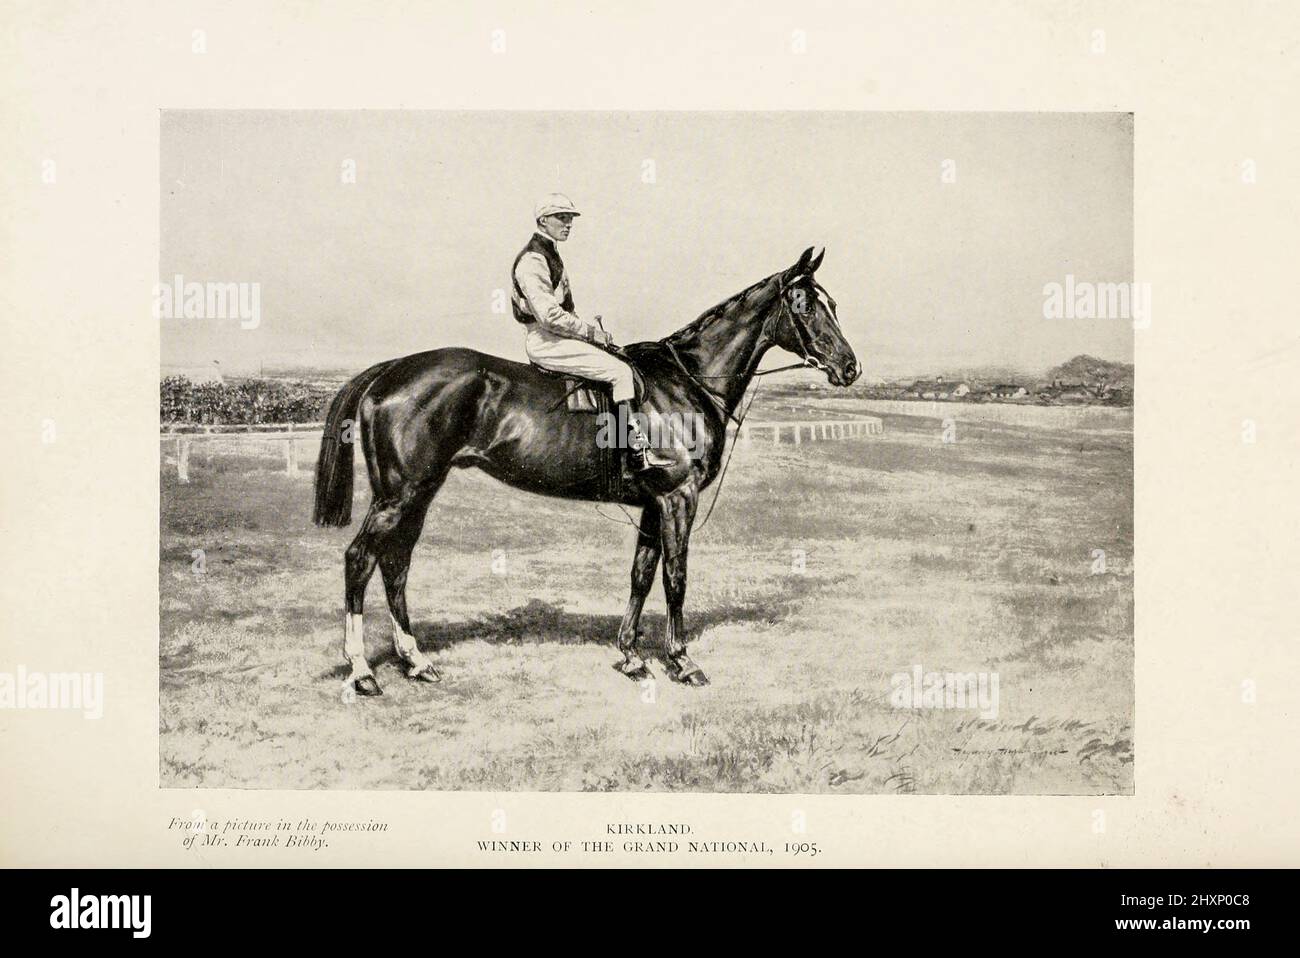 Kirkland Winner of the Grand National of 1905 Kirkland (foaled 1896) was an Irish-bred Thoroughbred racehorse who competed in National Hunt racing. Kirkland is most famous for winning the 1905 Grand National while being ridden by Frank Mason. He was the first, and so far only, Welsh-trained horse to have won the Grand National from the book Heroes and heroines of the Grand National by Finch Mason, A complete Account of Every Race from Its foundation in 1839 to the present year. Publication date 1907 London: : The Biographical Press, 12, Henrietta Street, Covent Garden, W.C. Stock Photo